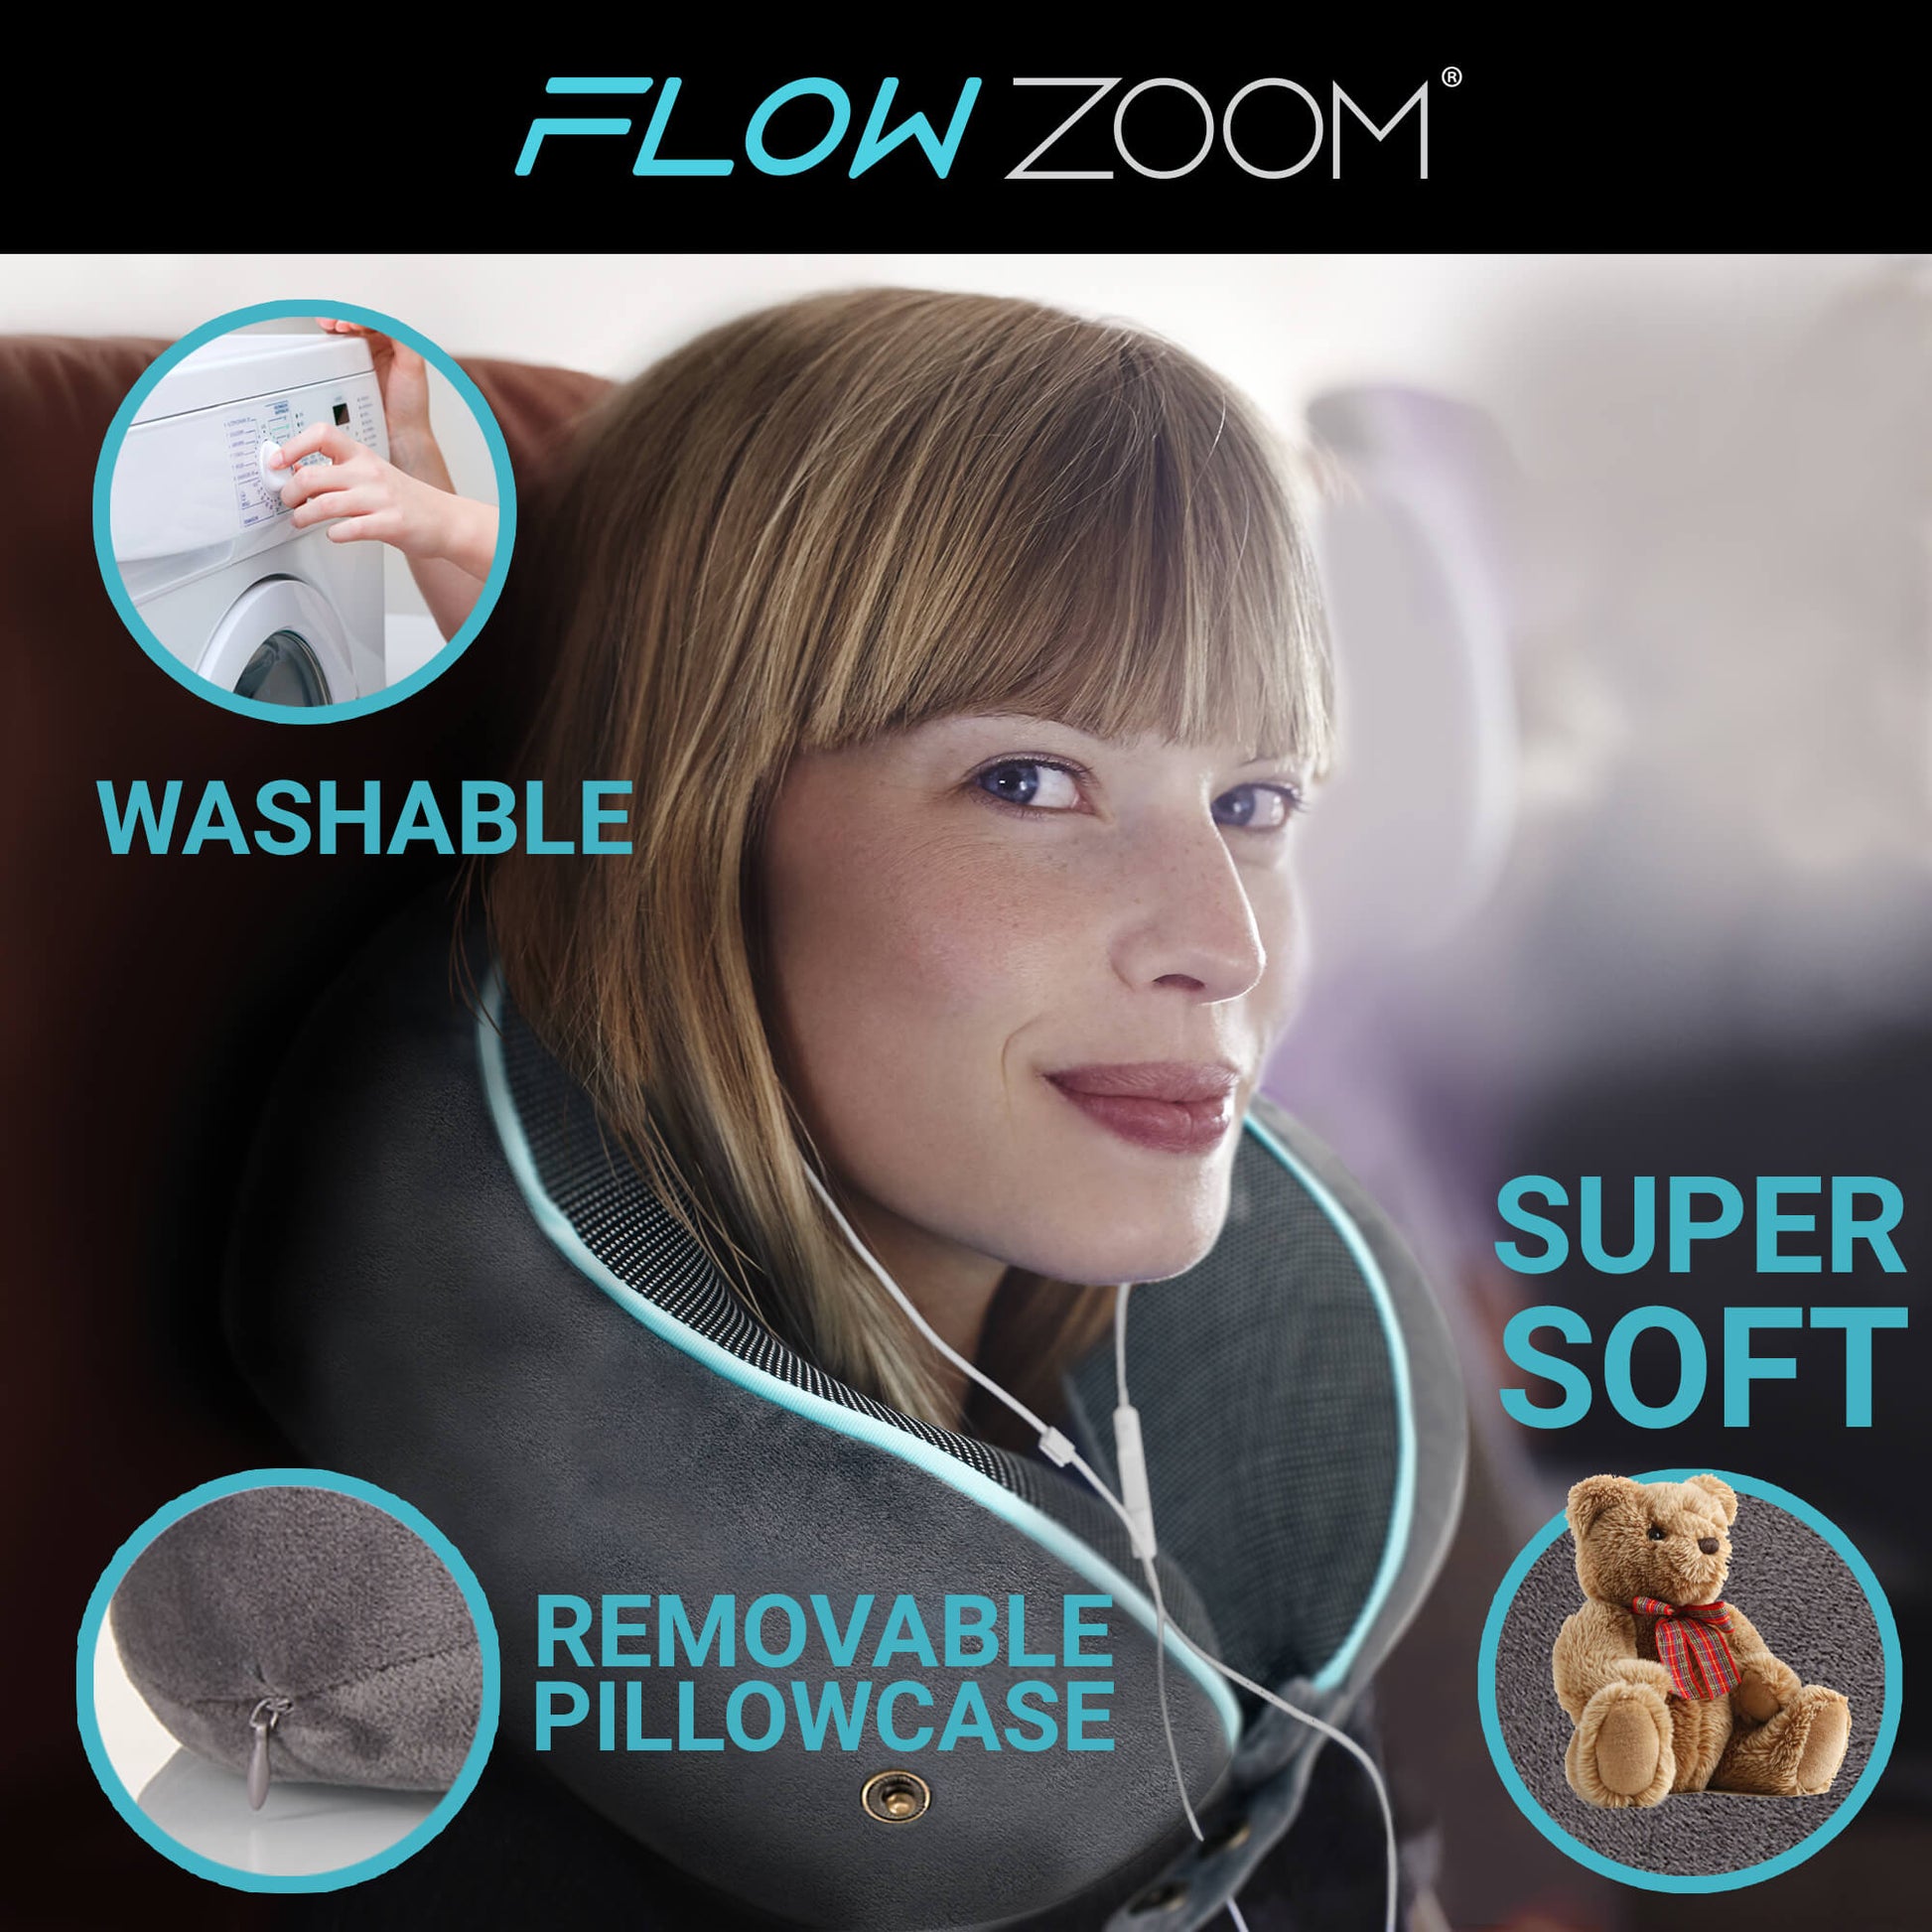 FLOWZOOM Memory Foam Pillow - Very Soft and Washable